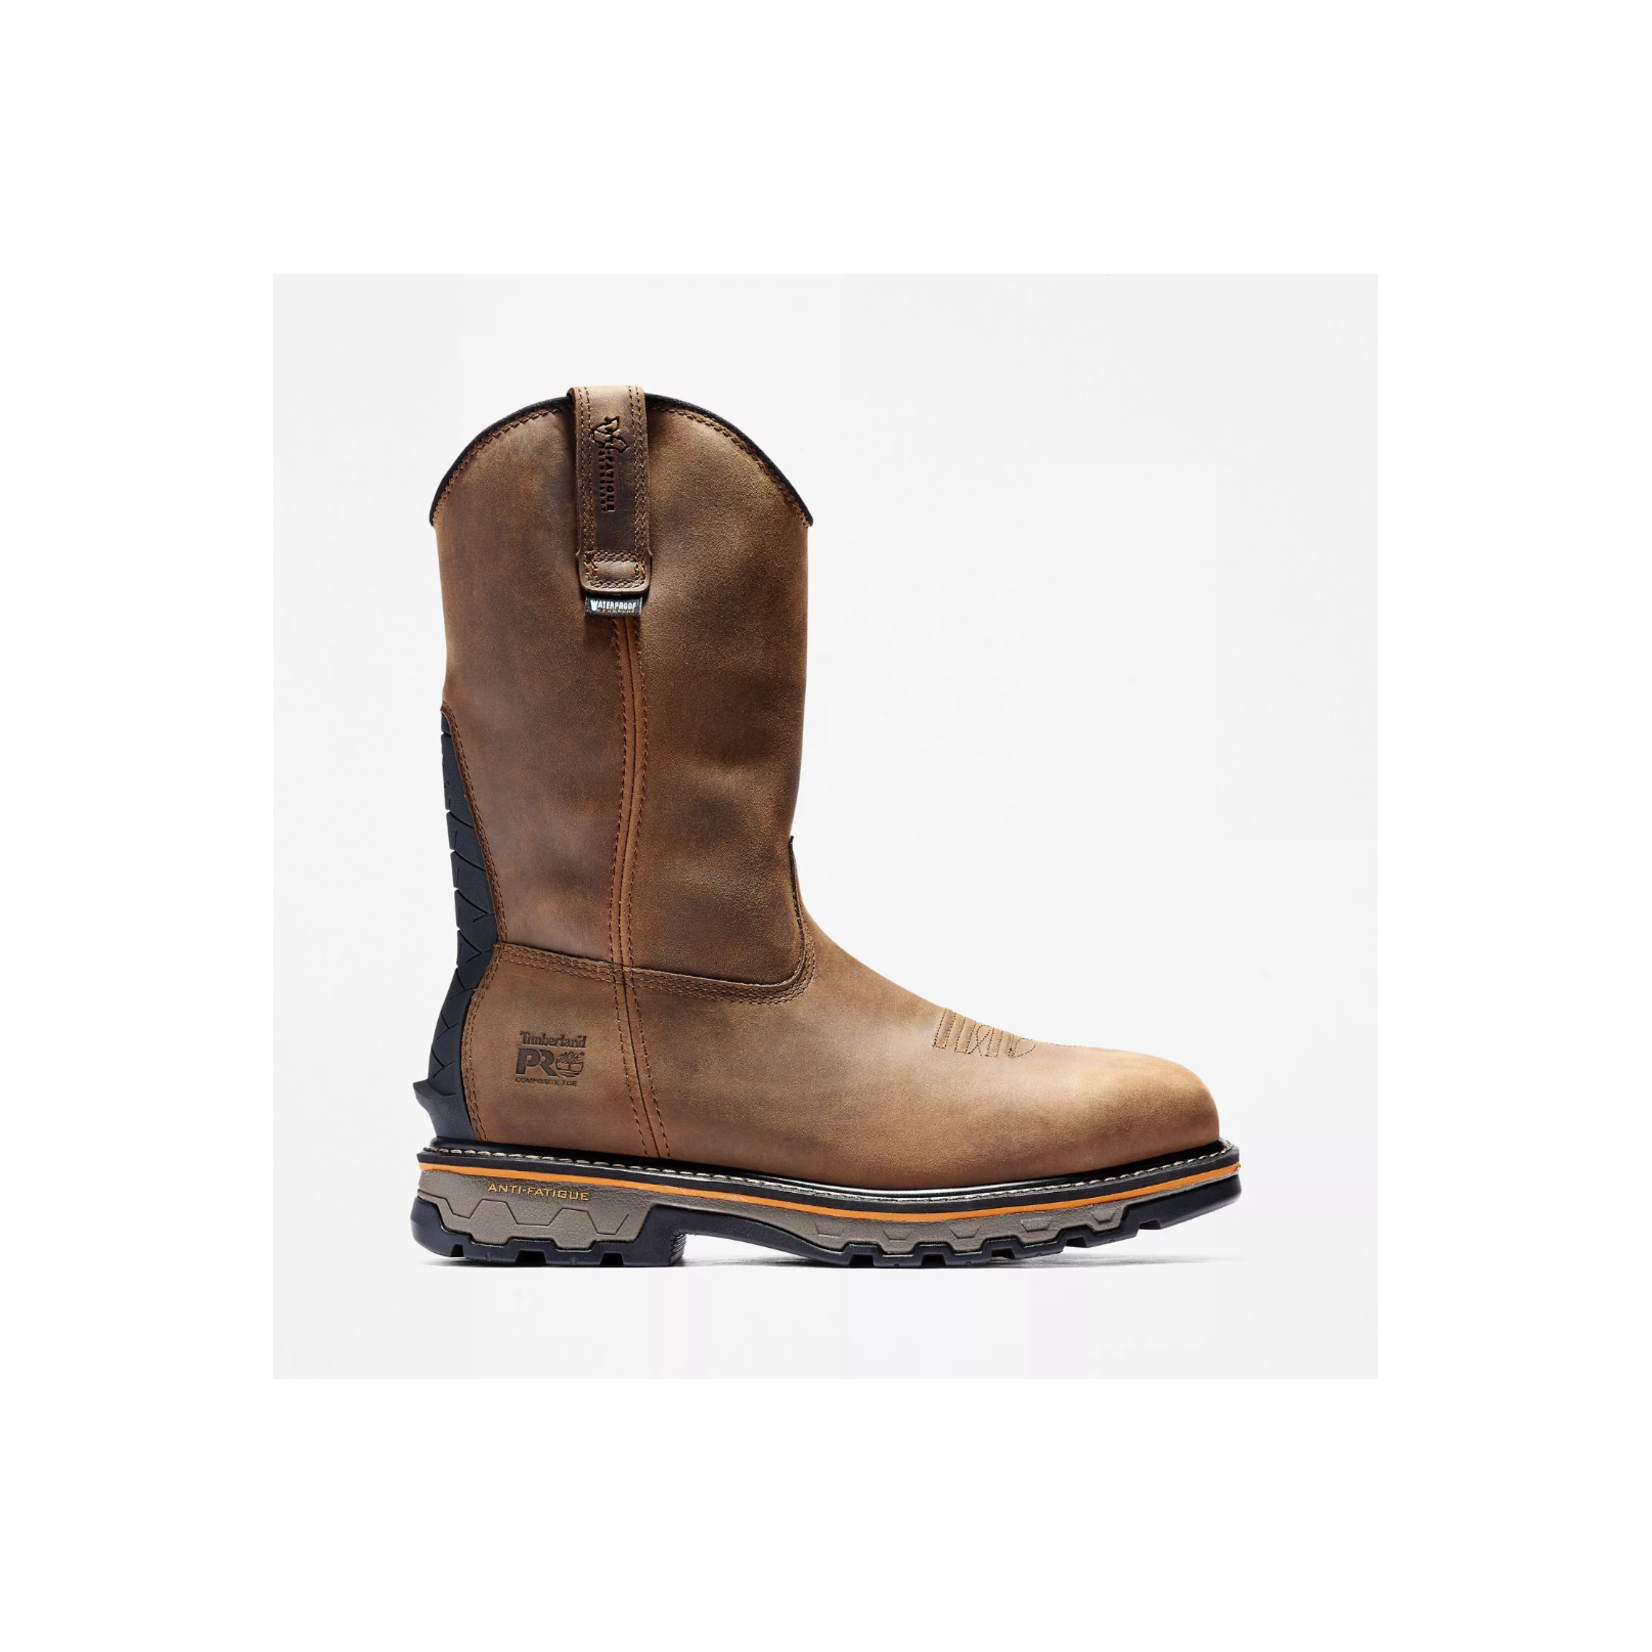 TIMBERLAND TRUE GRIT PULLON NT EH